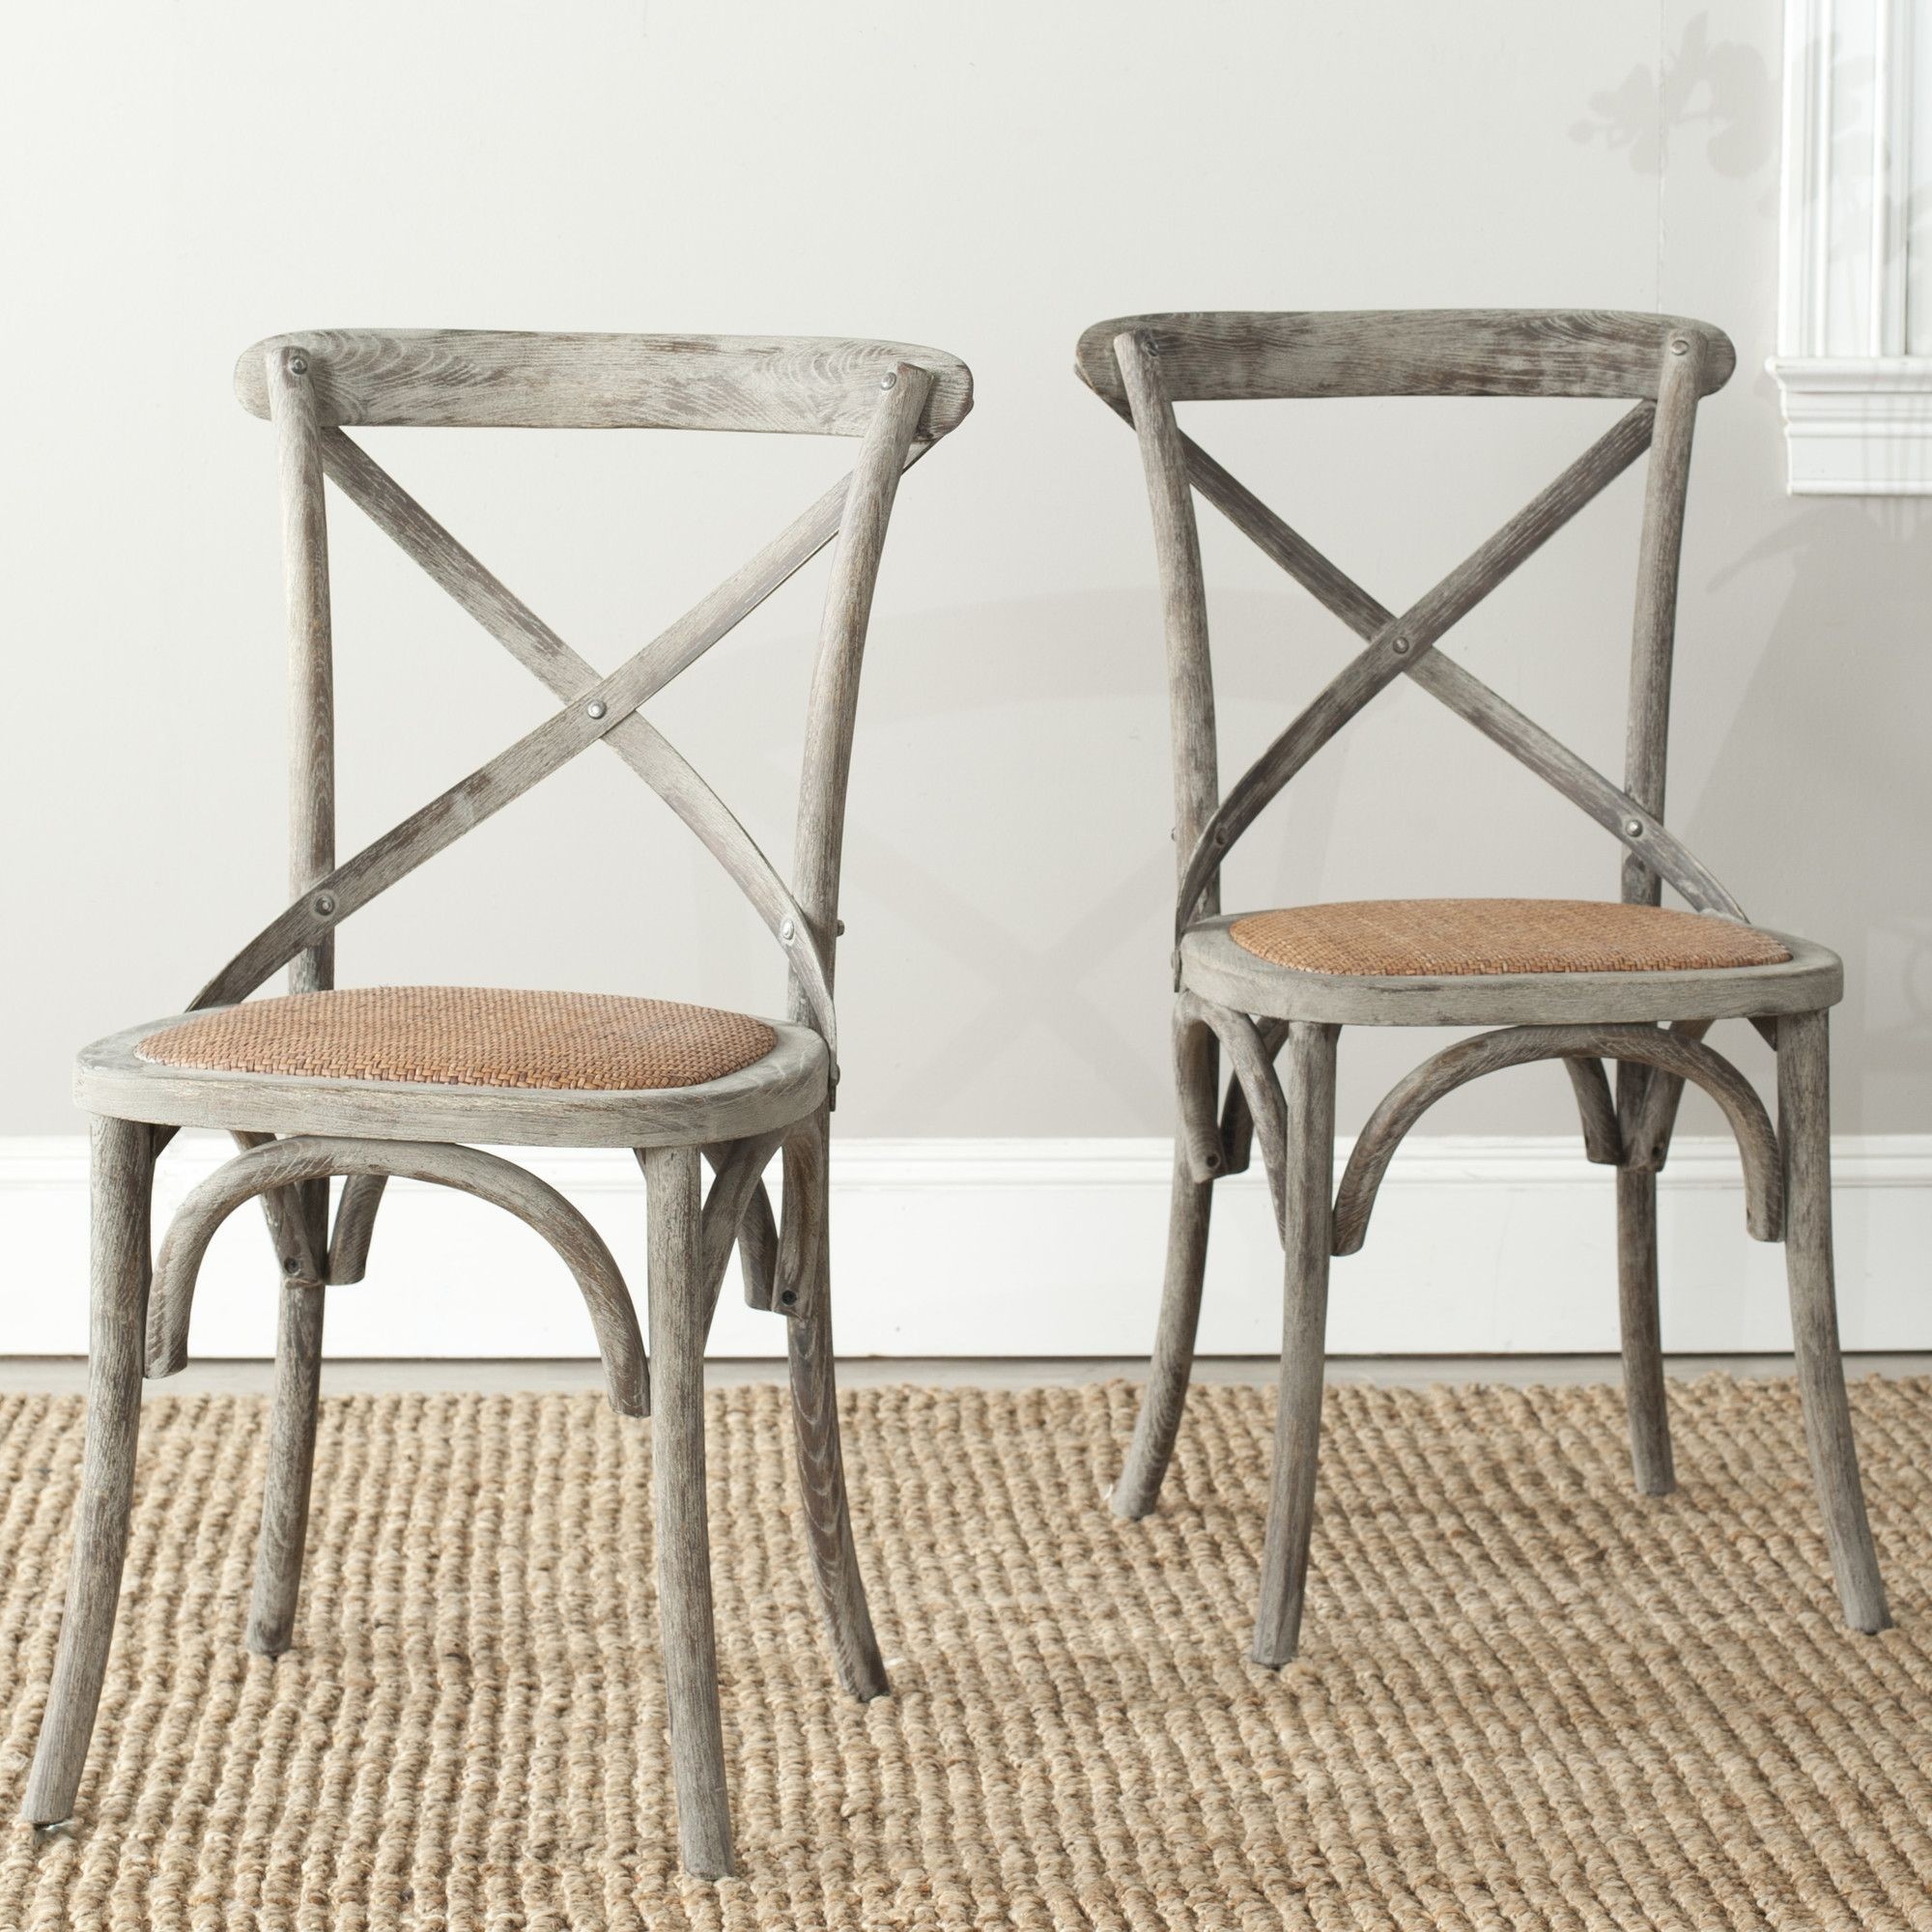 Franklin Side Chair (Set of 2)